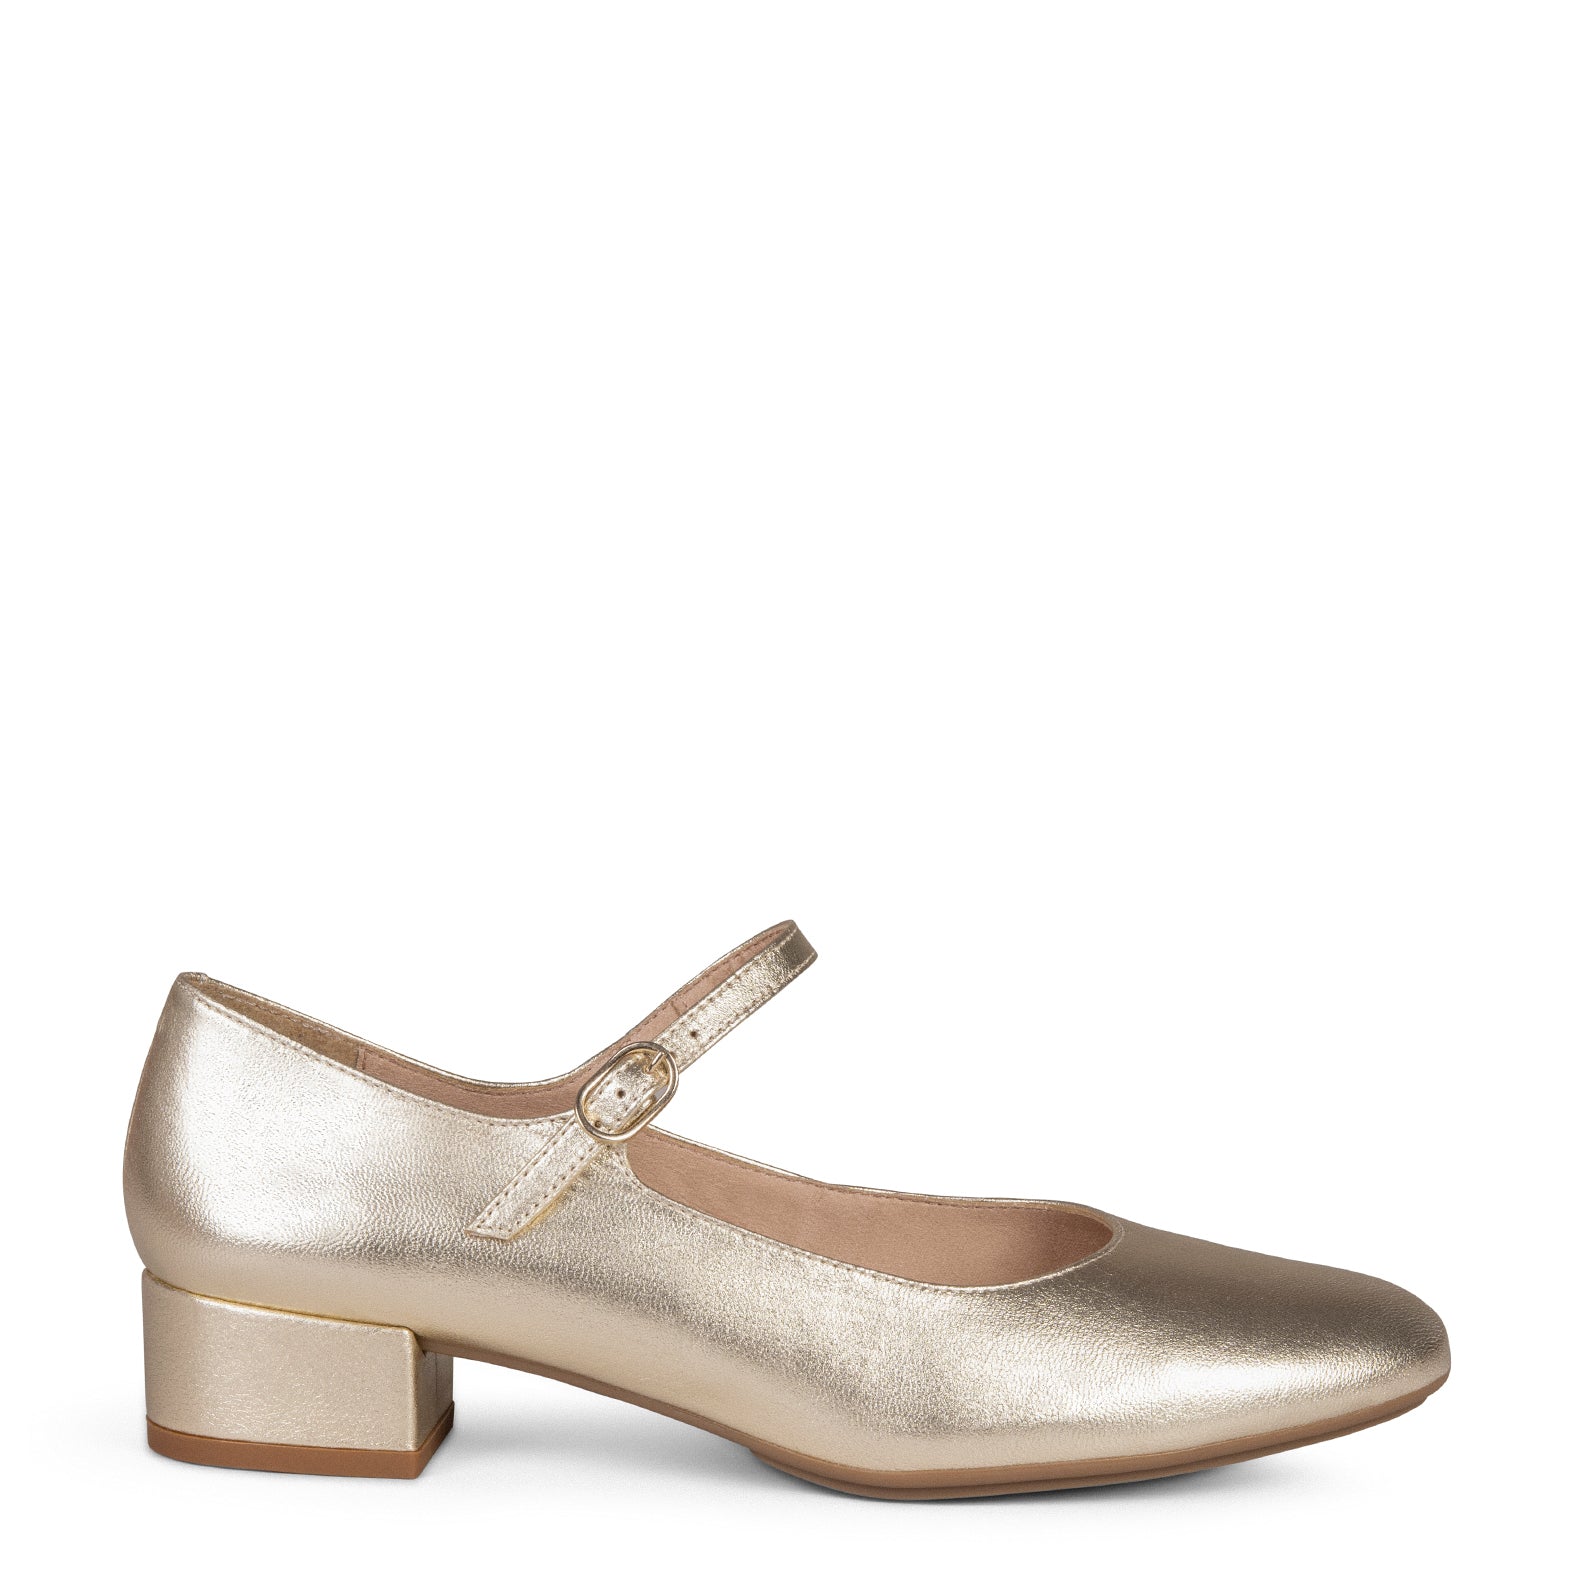 NORA – GOLDEN Mary-Janes with low heel 